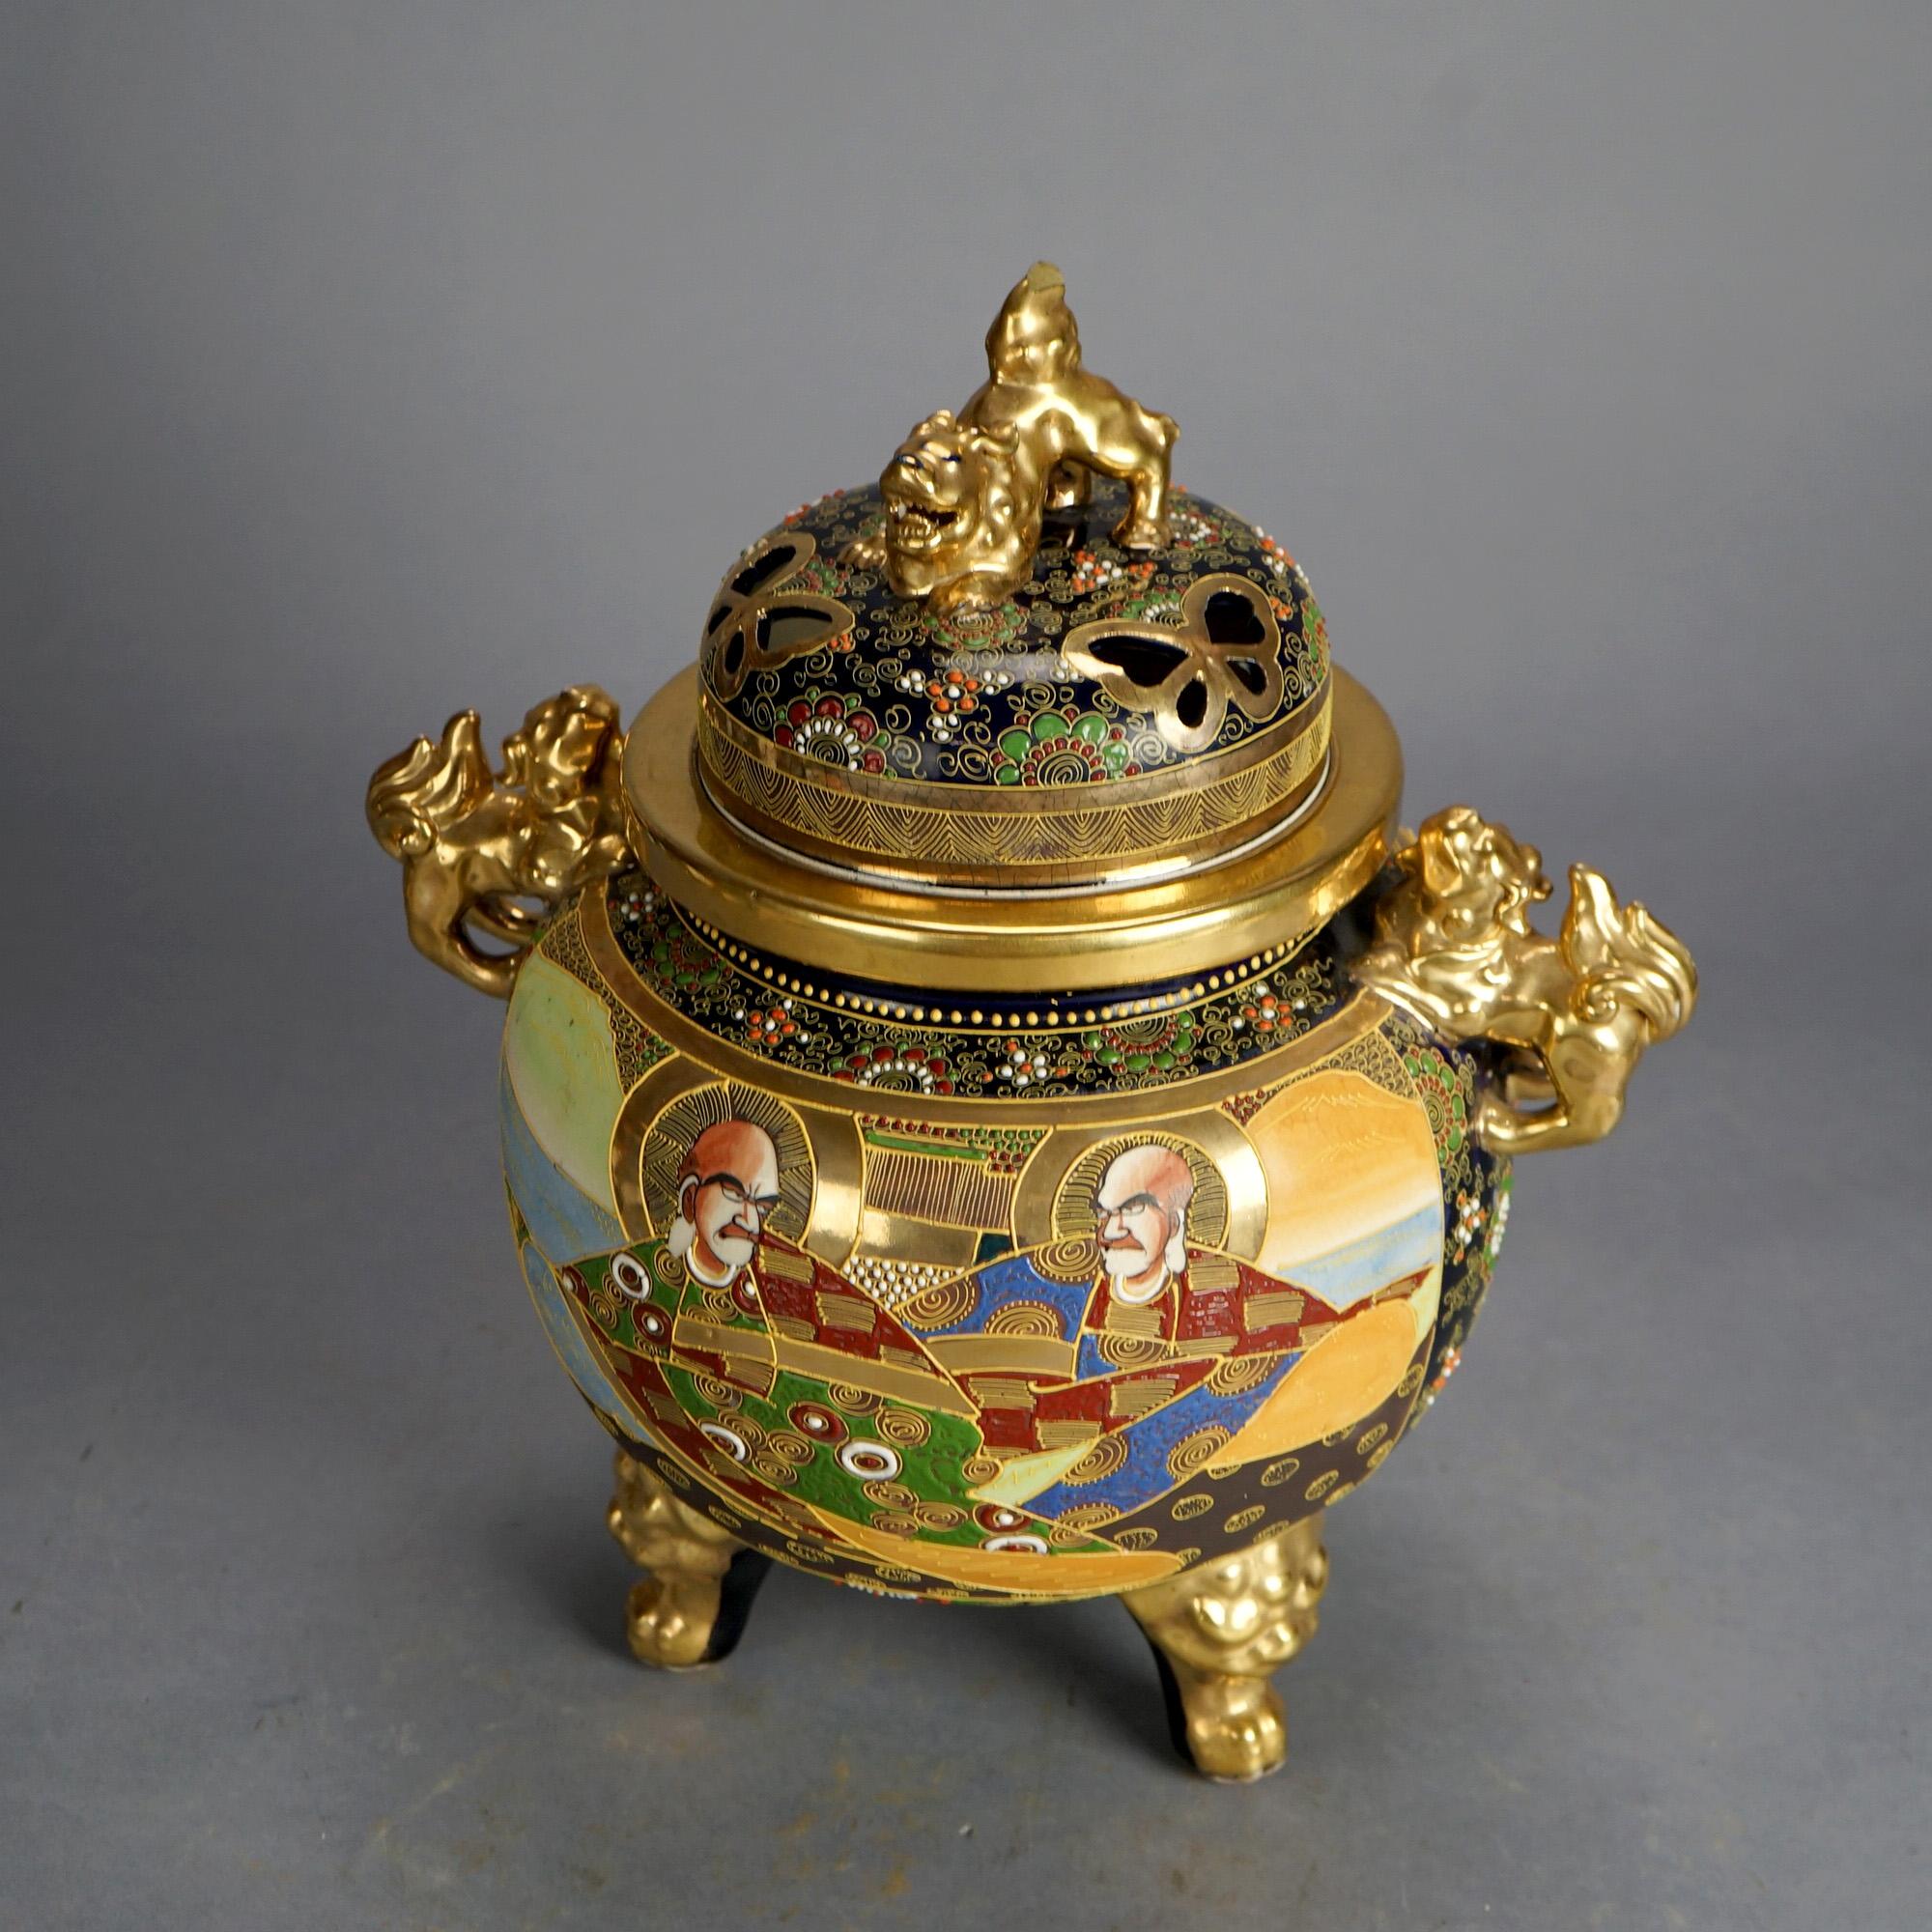 An antique Japanese Satsuma censer offers porcelain construction with hand painted figures, foo dogs throughout, heavily gilt highlights, and raised on three feet; signed on base as photographed; c1930

Measures- 15.75''H x 13.25''W x 10.5''D